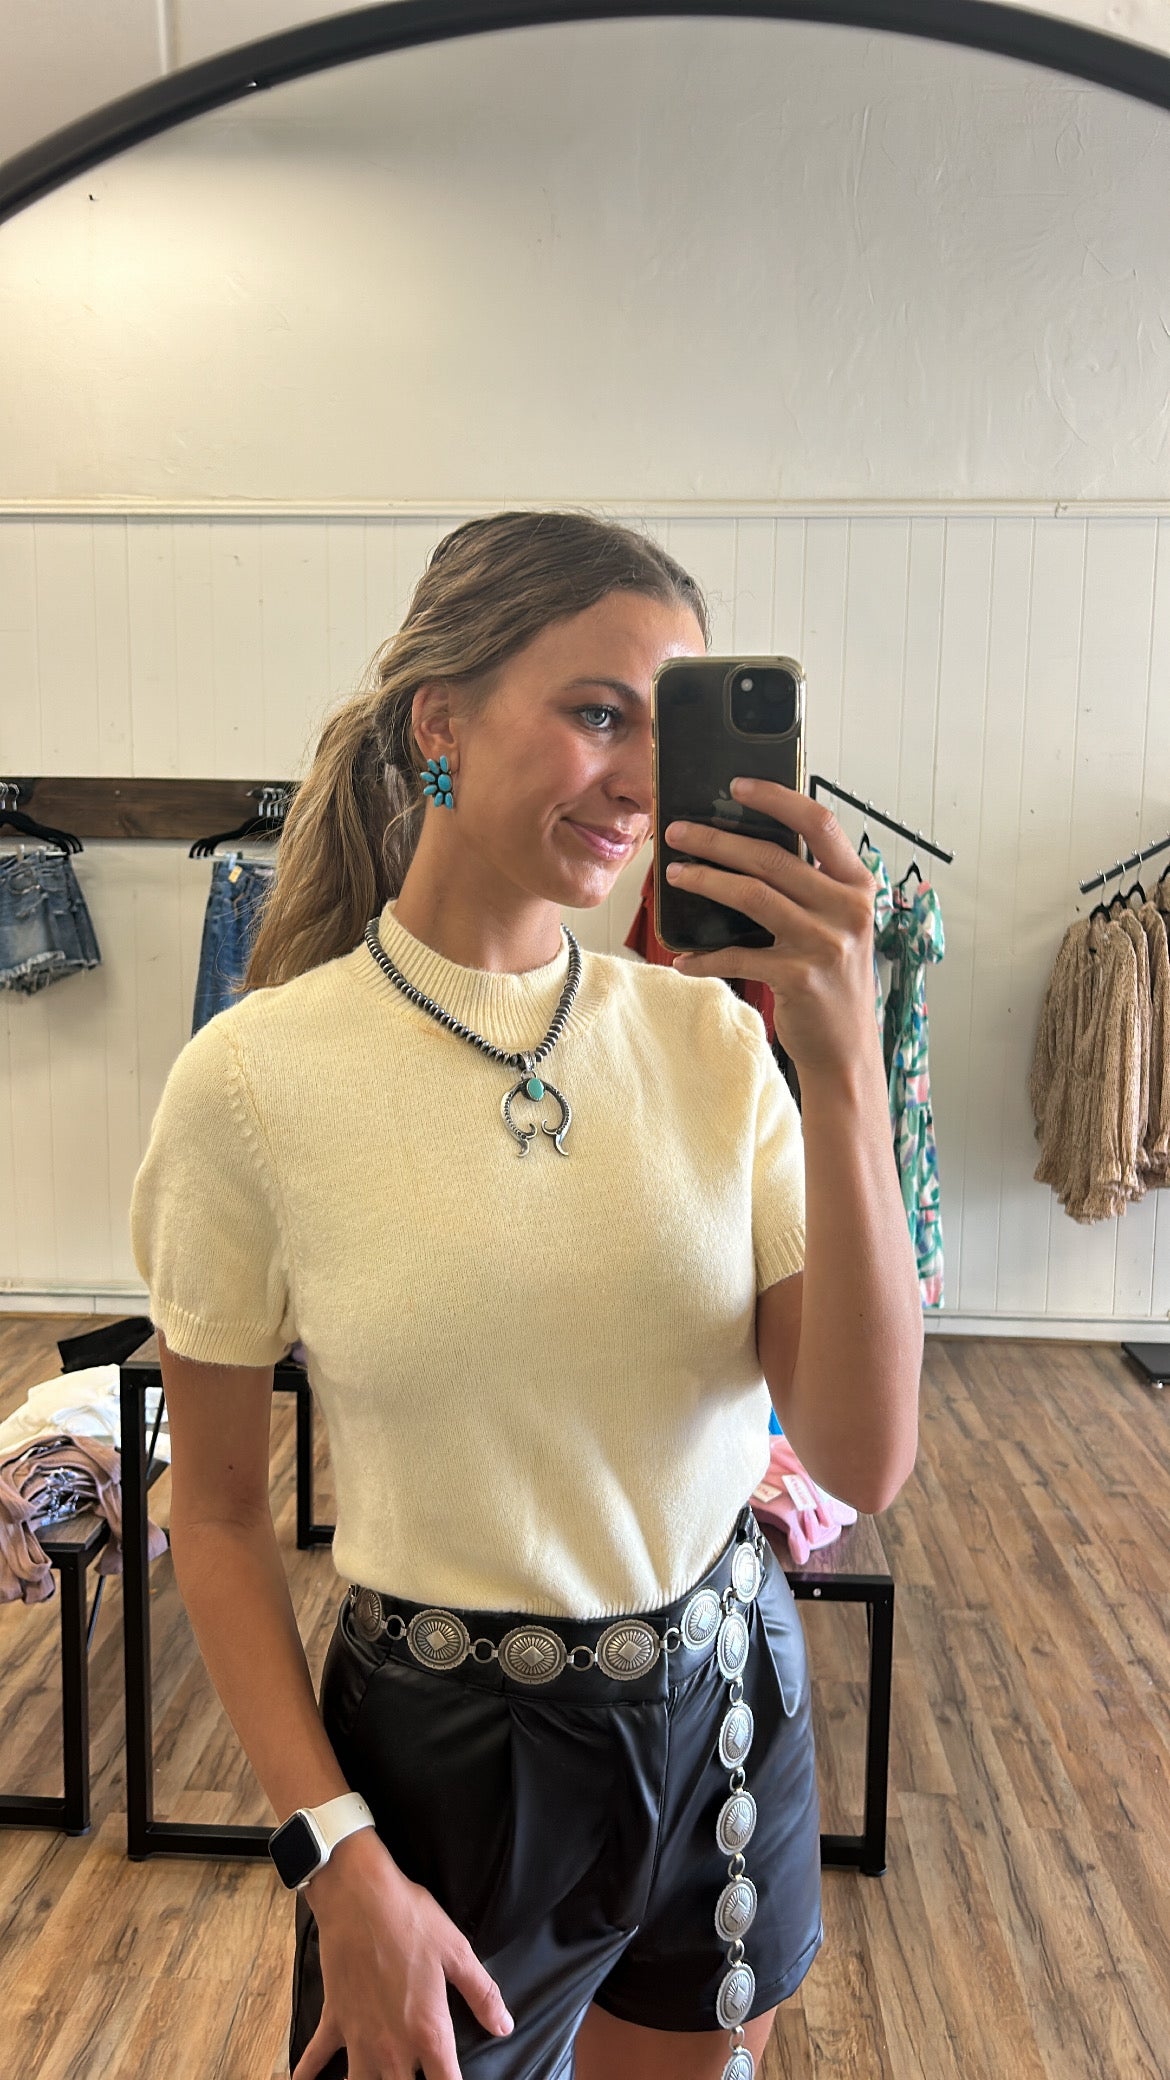 The Cream Knit Top